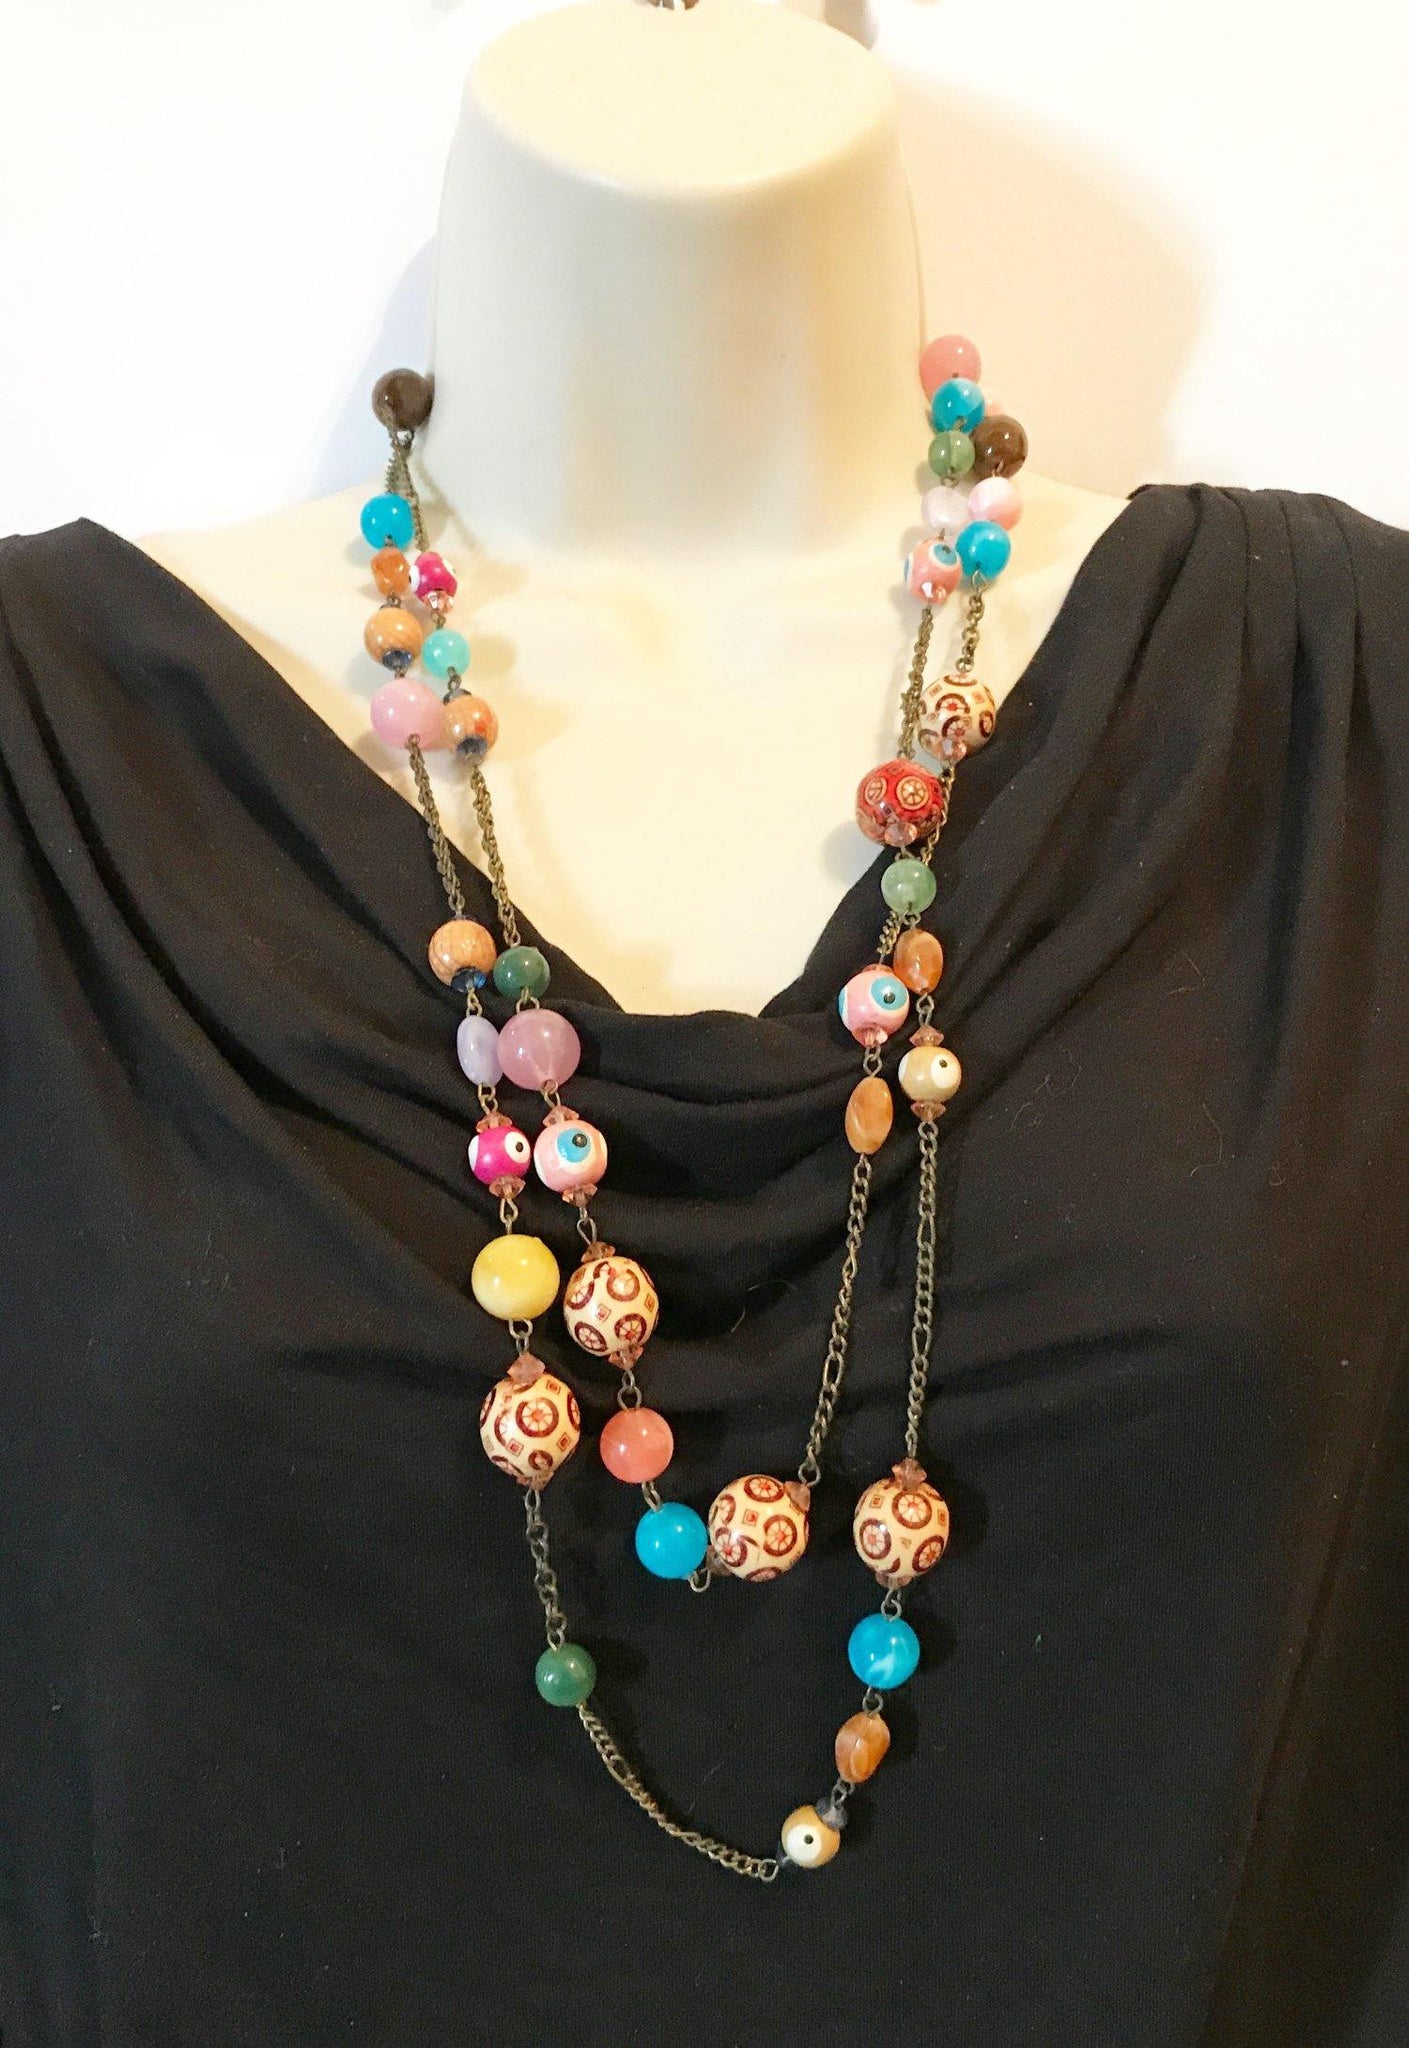 Colorful and Wild 60” Beaded Vintage Necklace - Lamoree’s Vintage